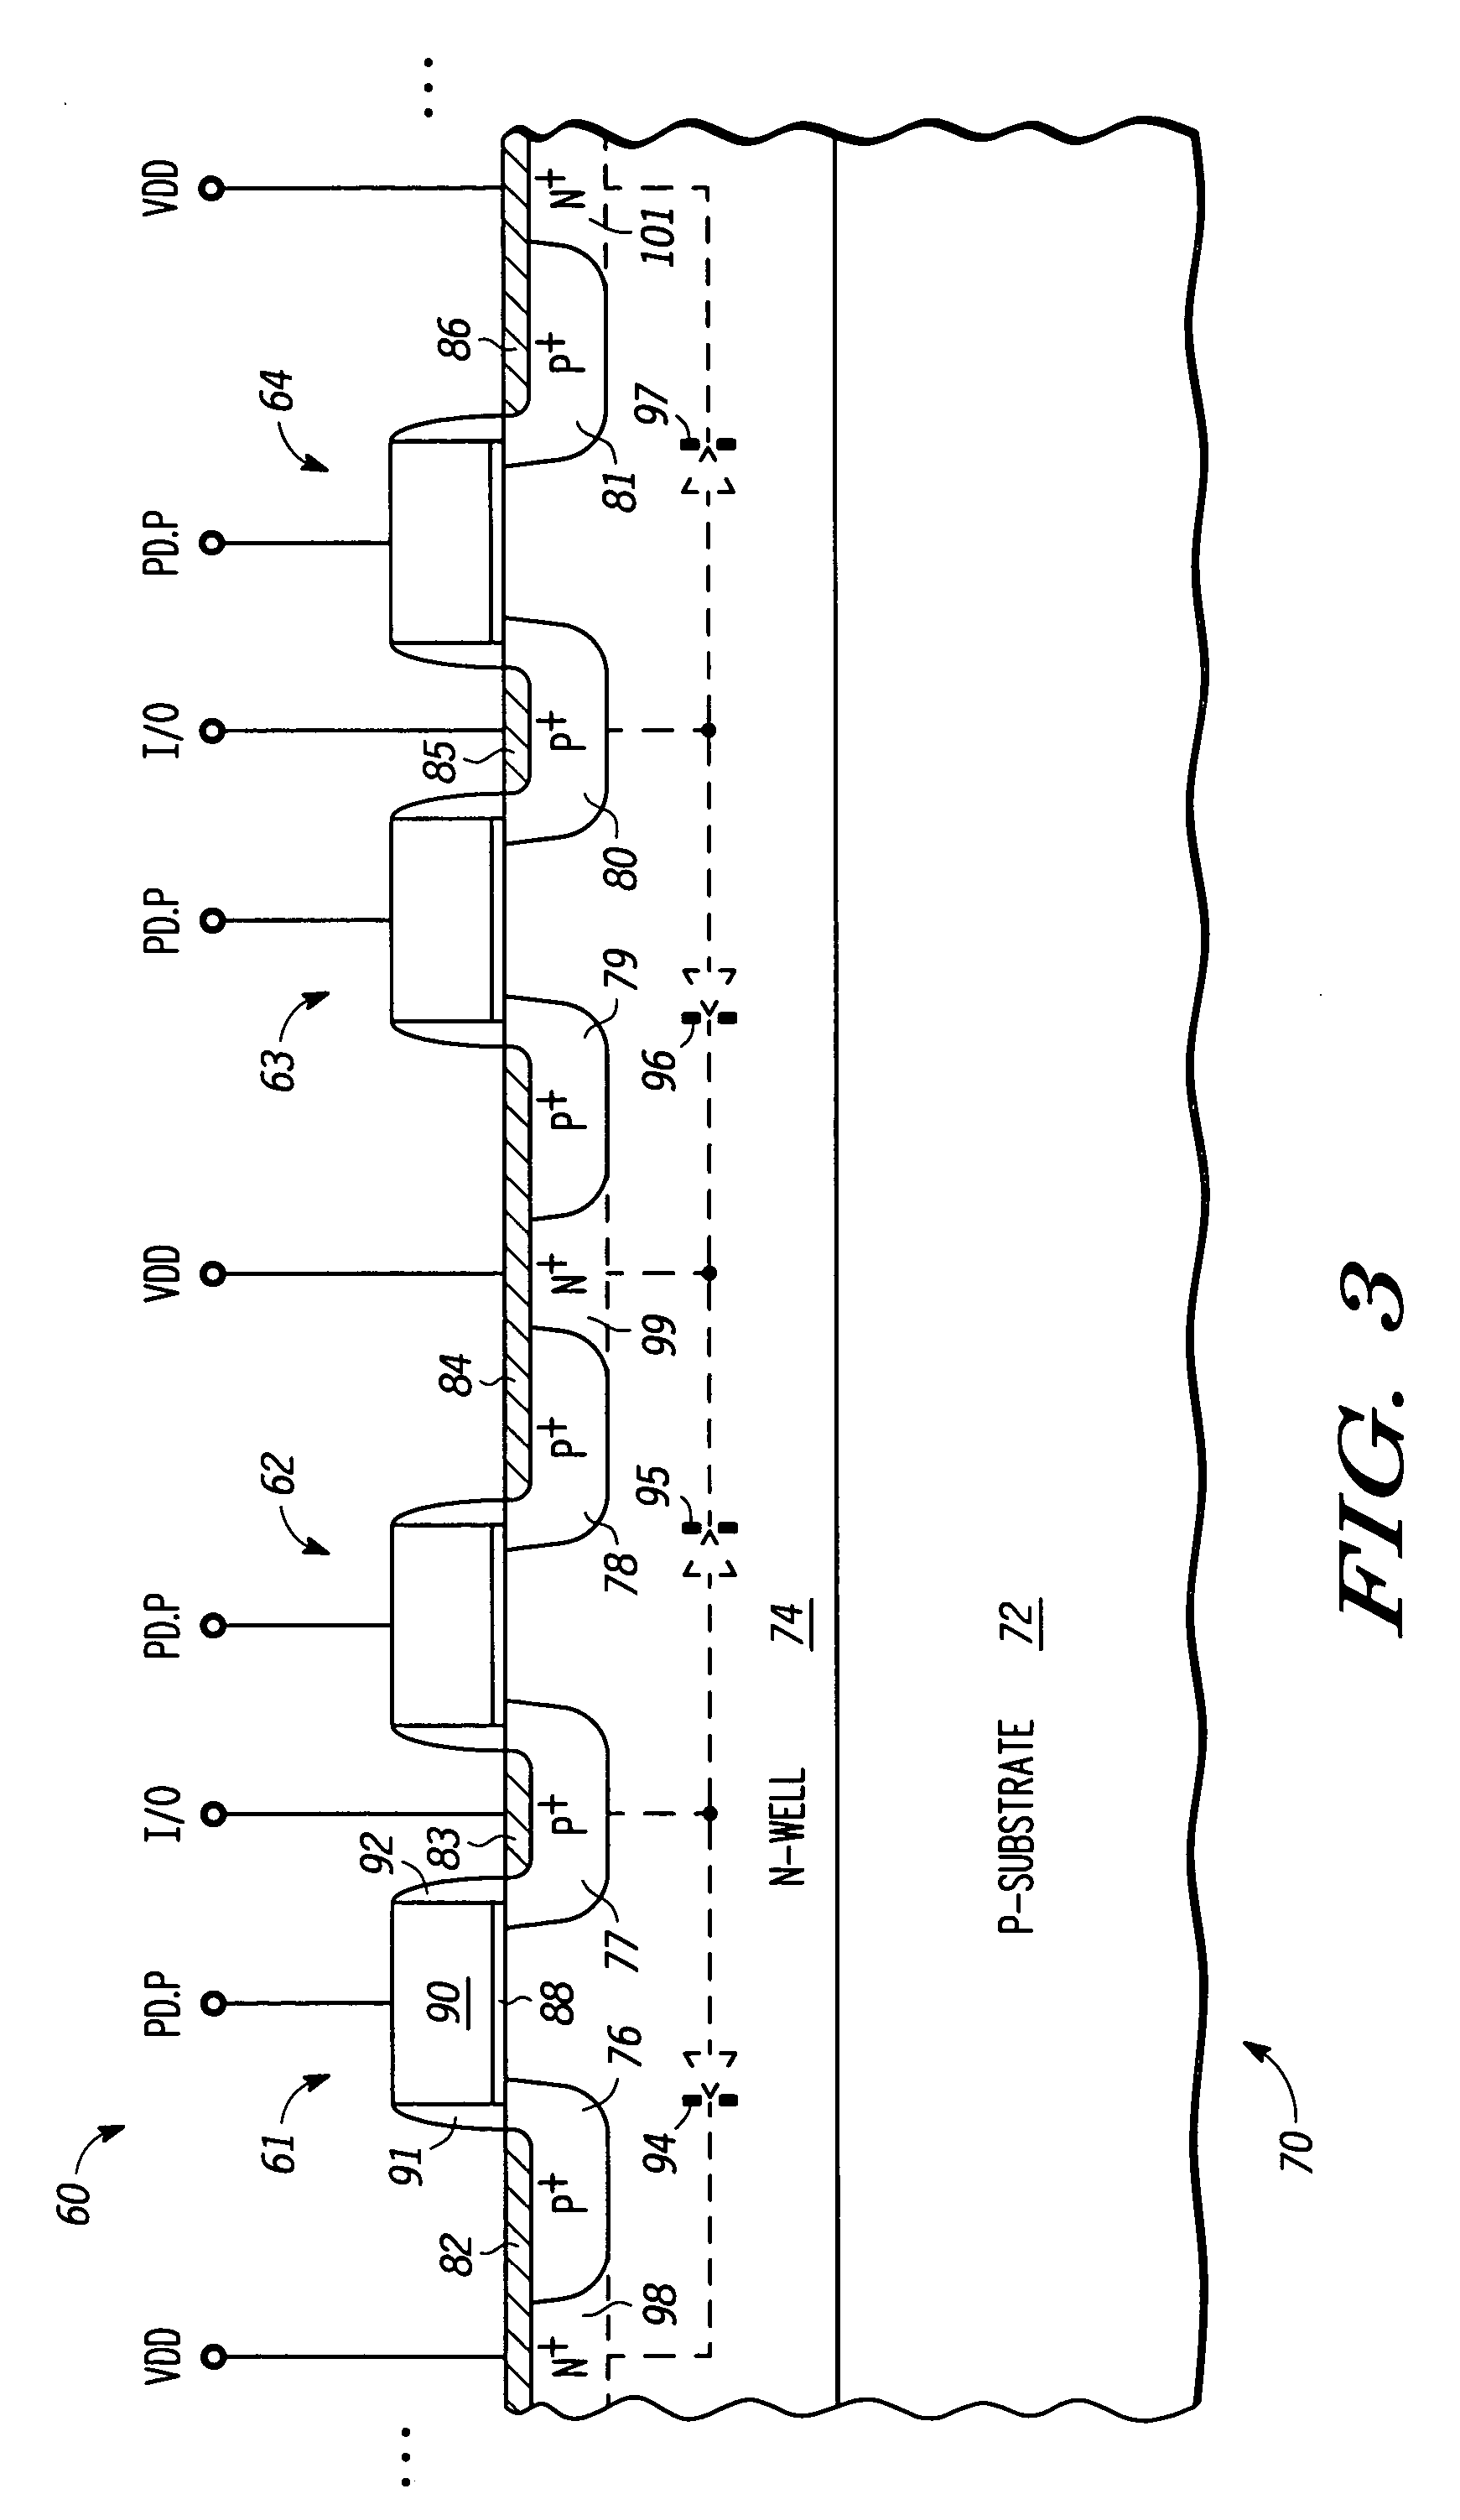 Electrostatic discharge protection for an integrated circuit